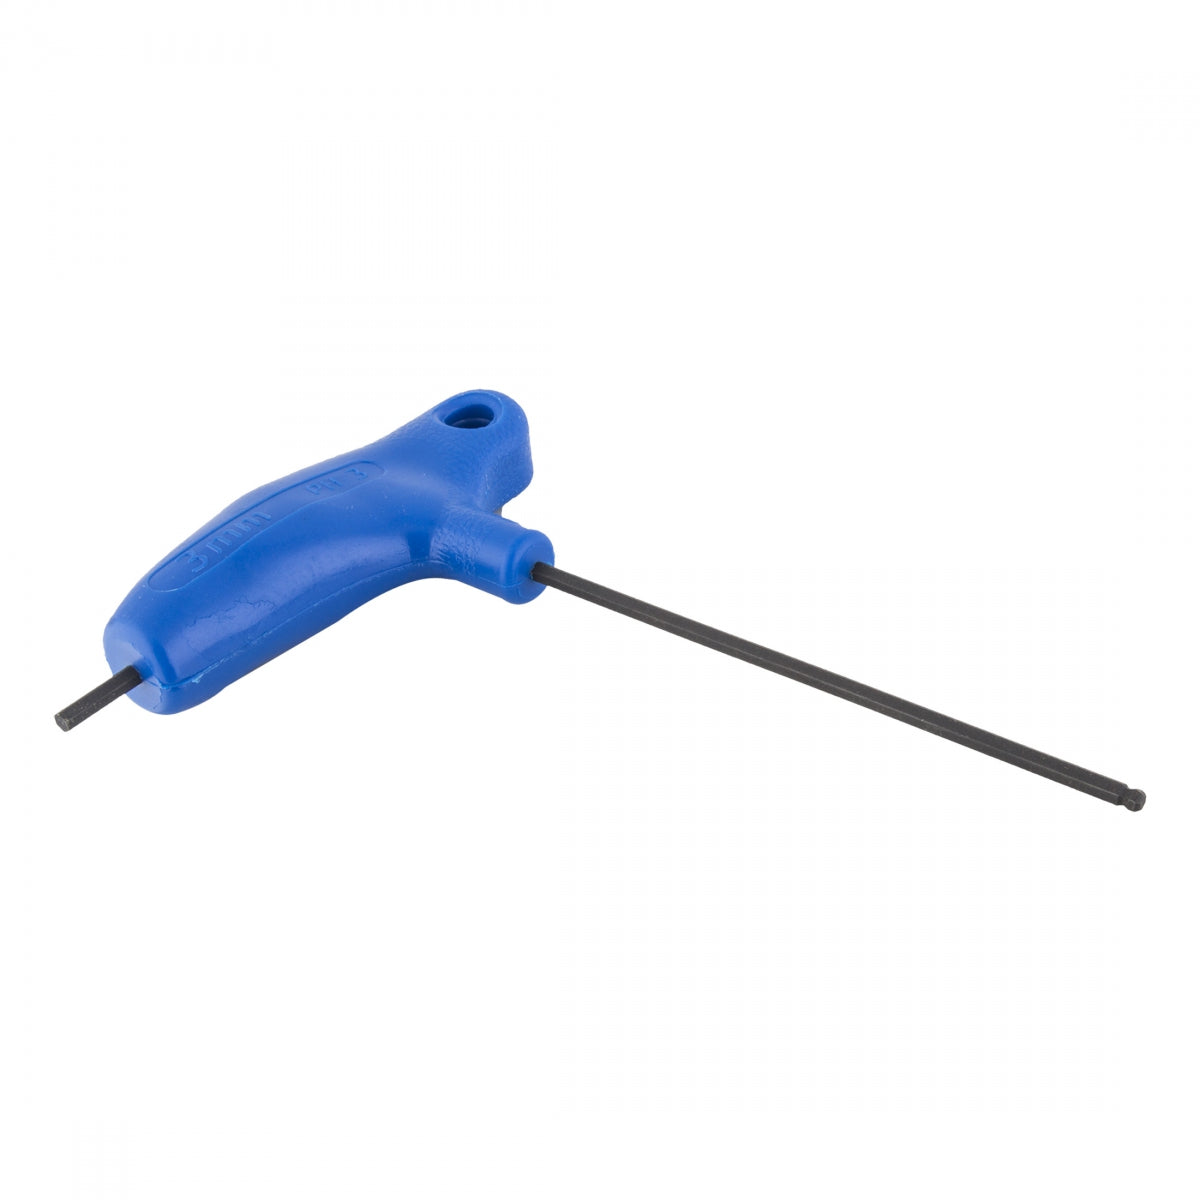 Park Tool #PH-3 P-Handle Hex Wrench, 3mm